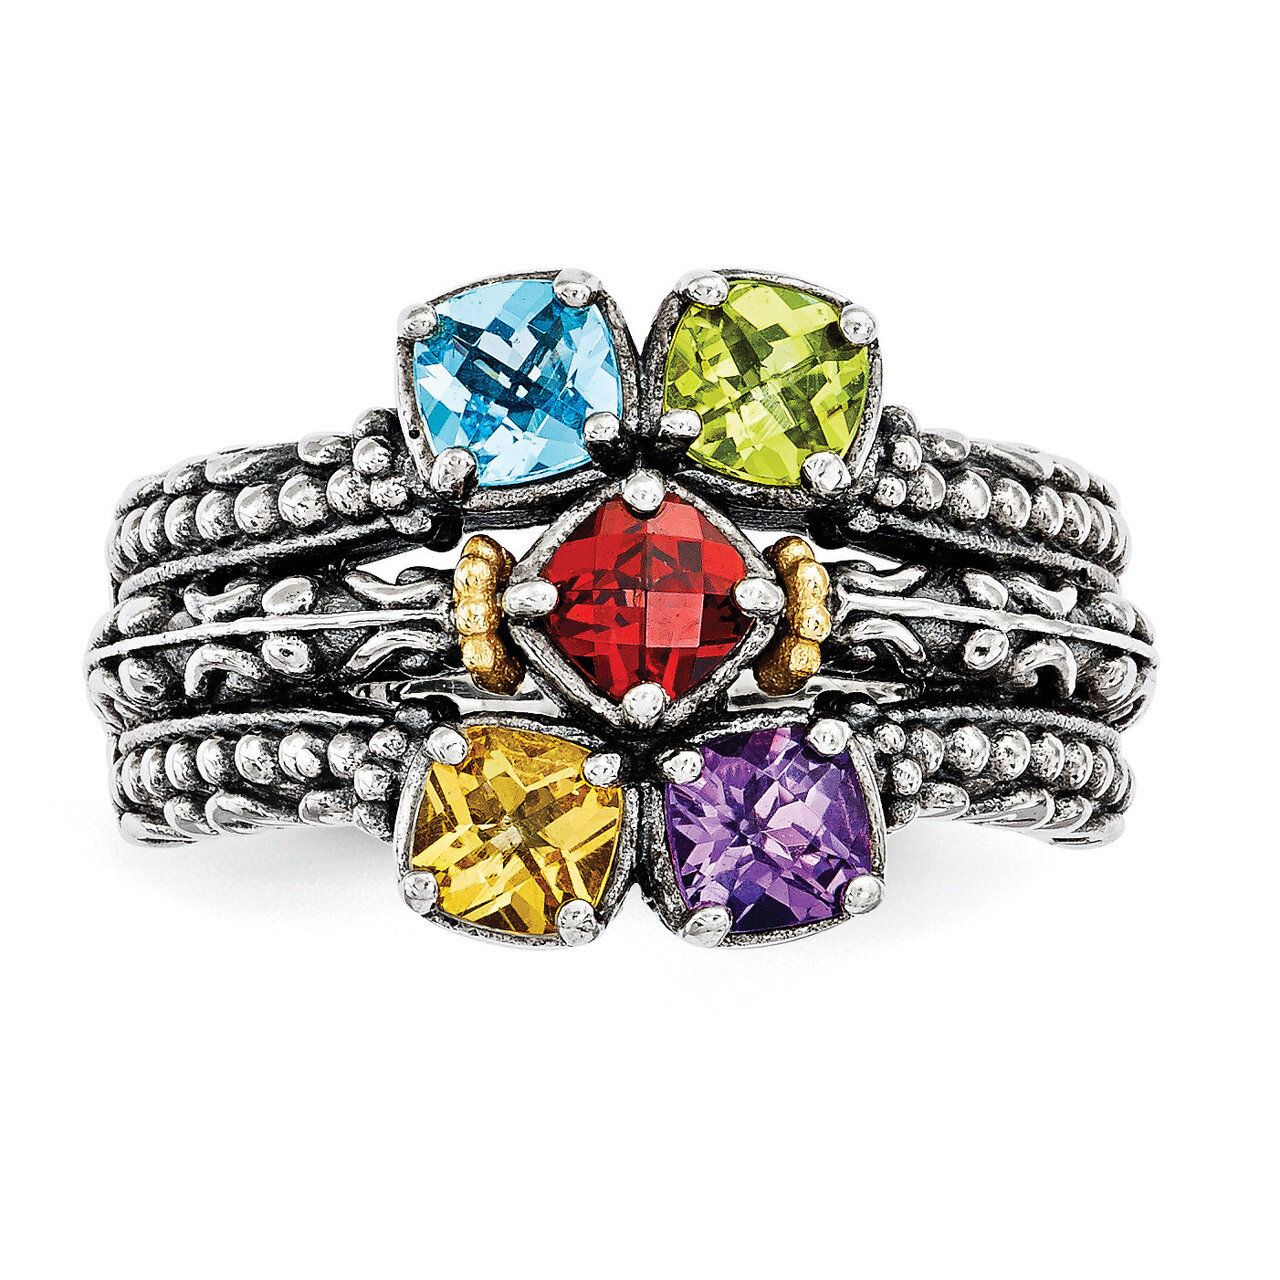 5 Birthstones & 14k Five-stone Mother's Ring Sterling Silver QMR10/5-10